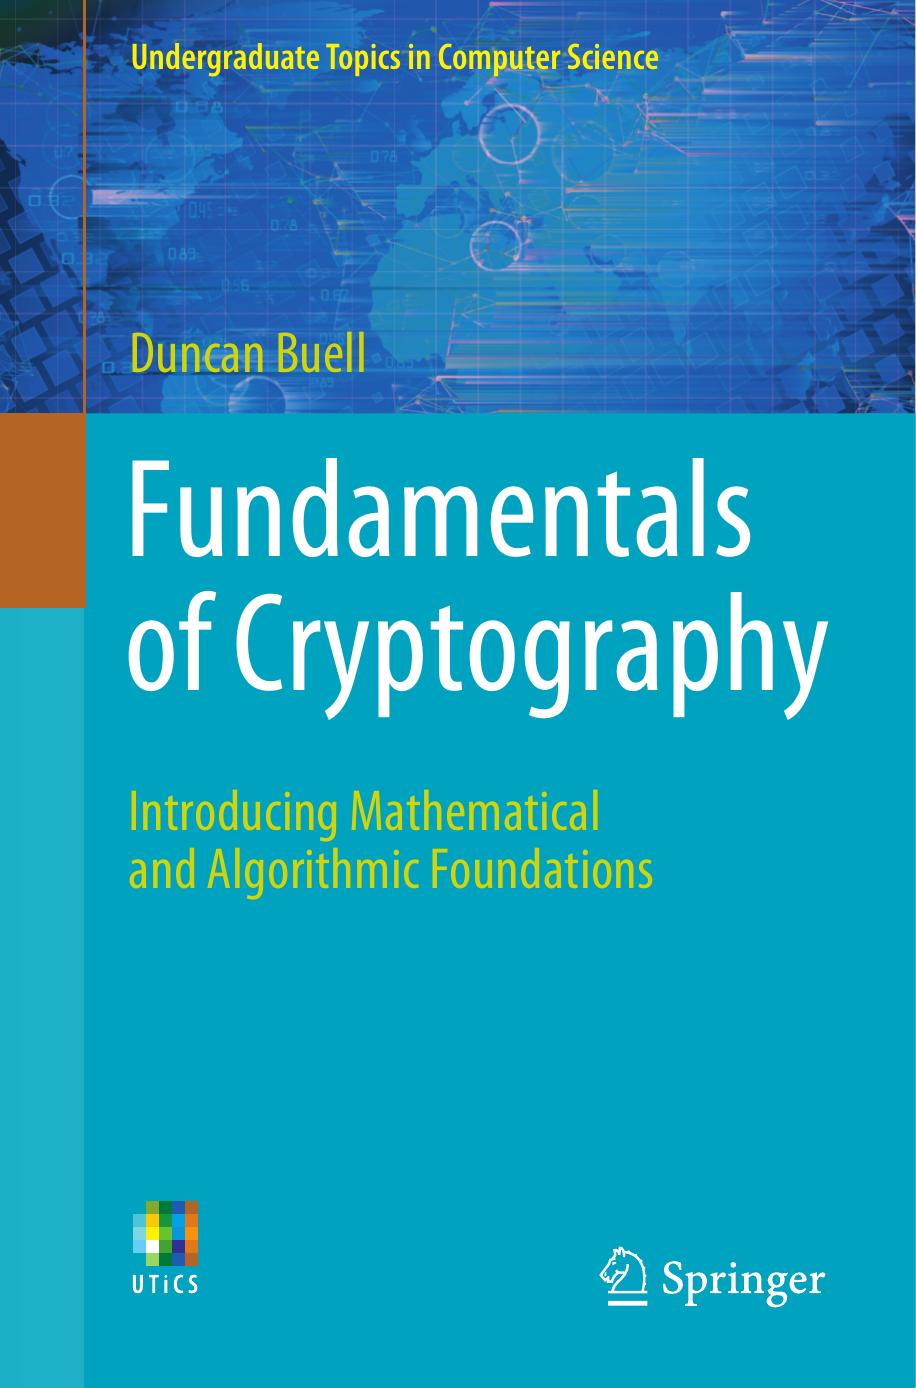 Fundamentals of Cryptography: Introducing Mathematical and Algorithmic Foundations